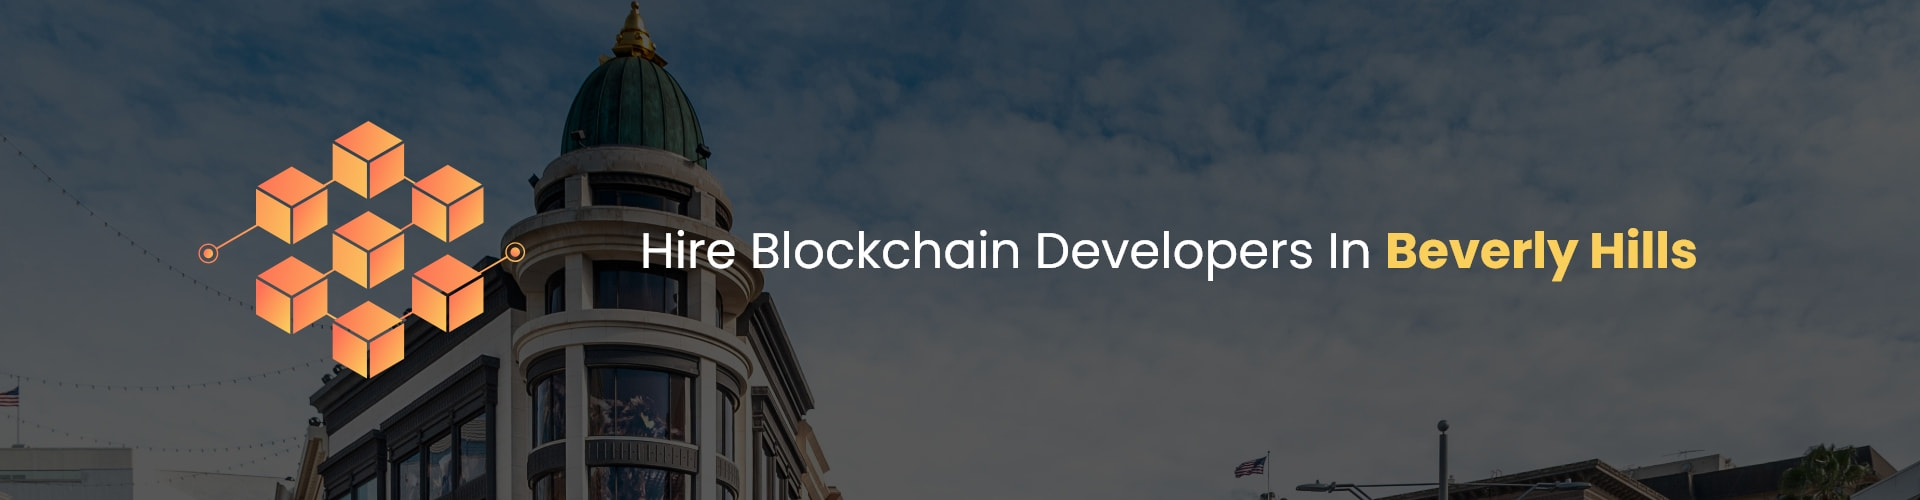 hire blockchain developers in beverly hills